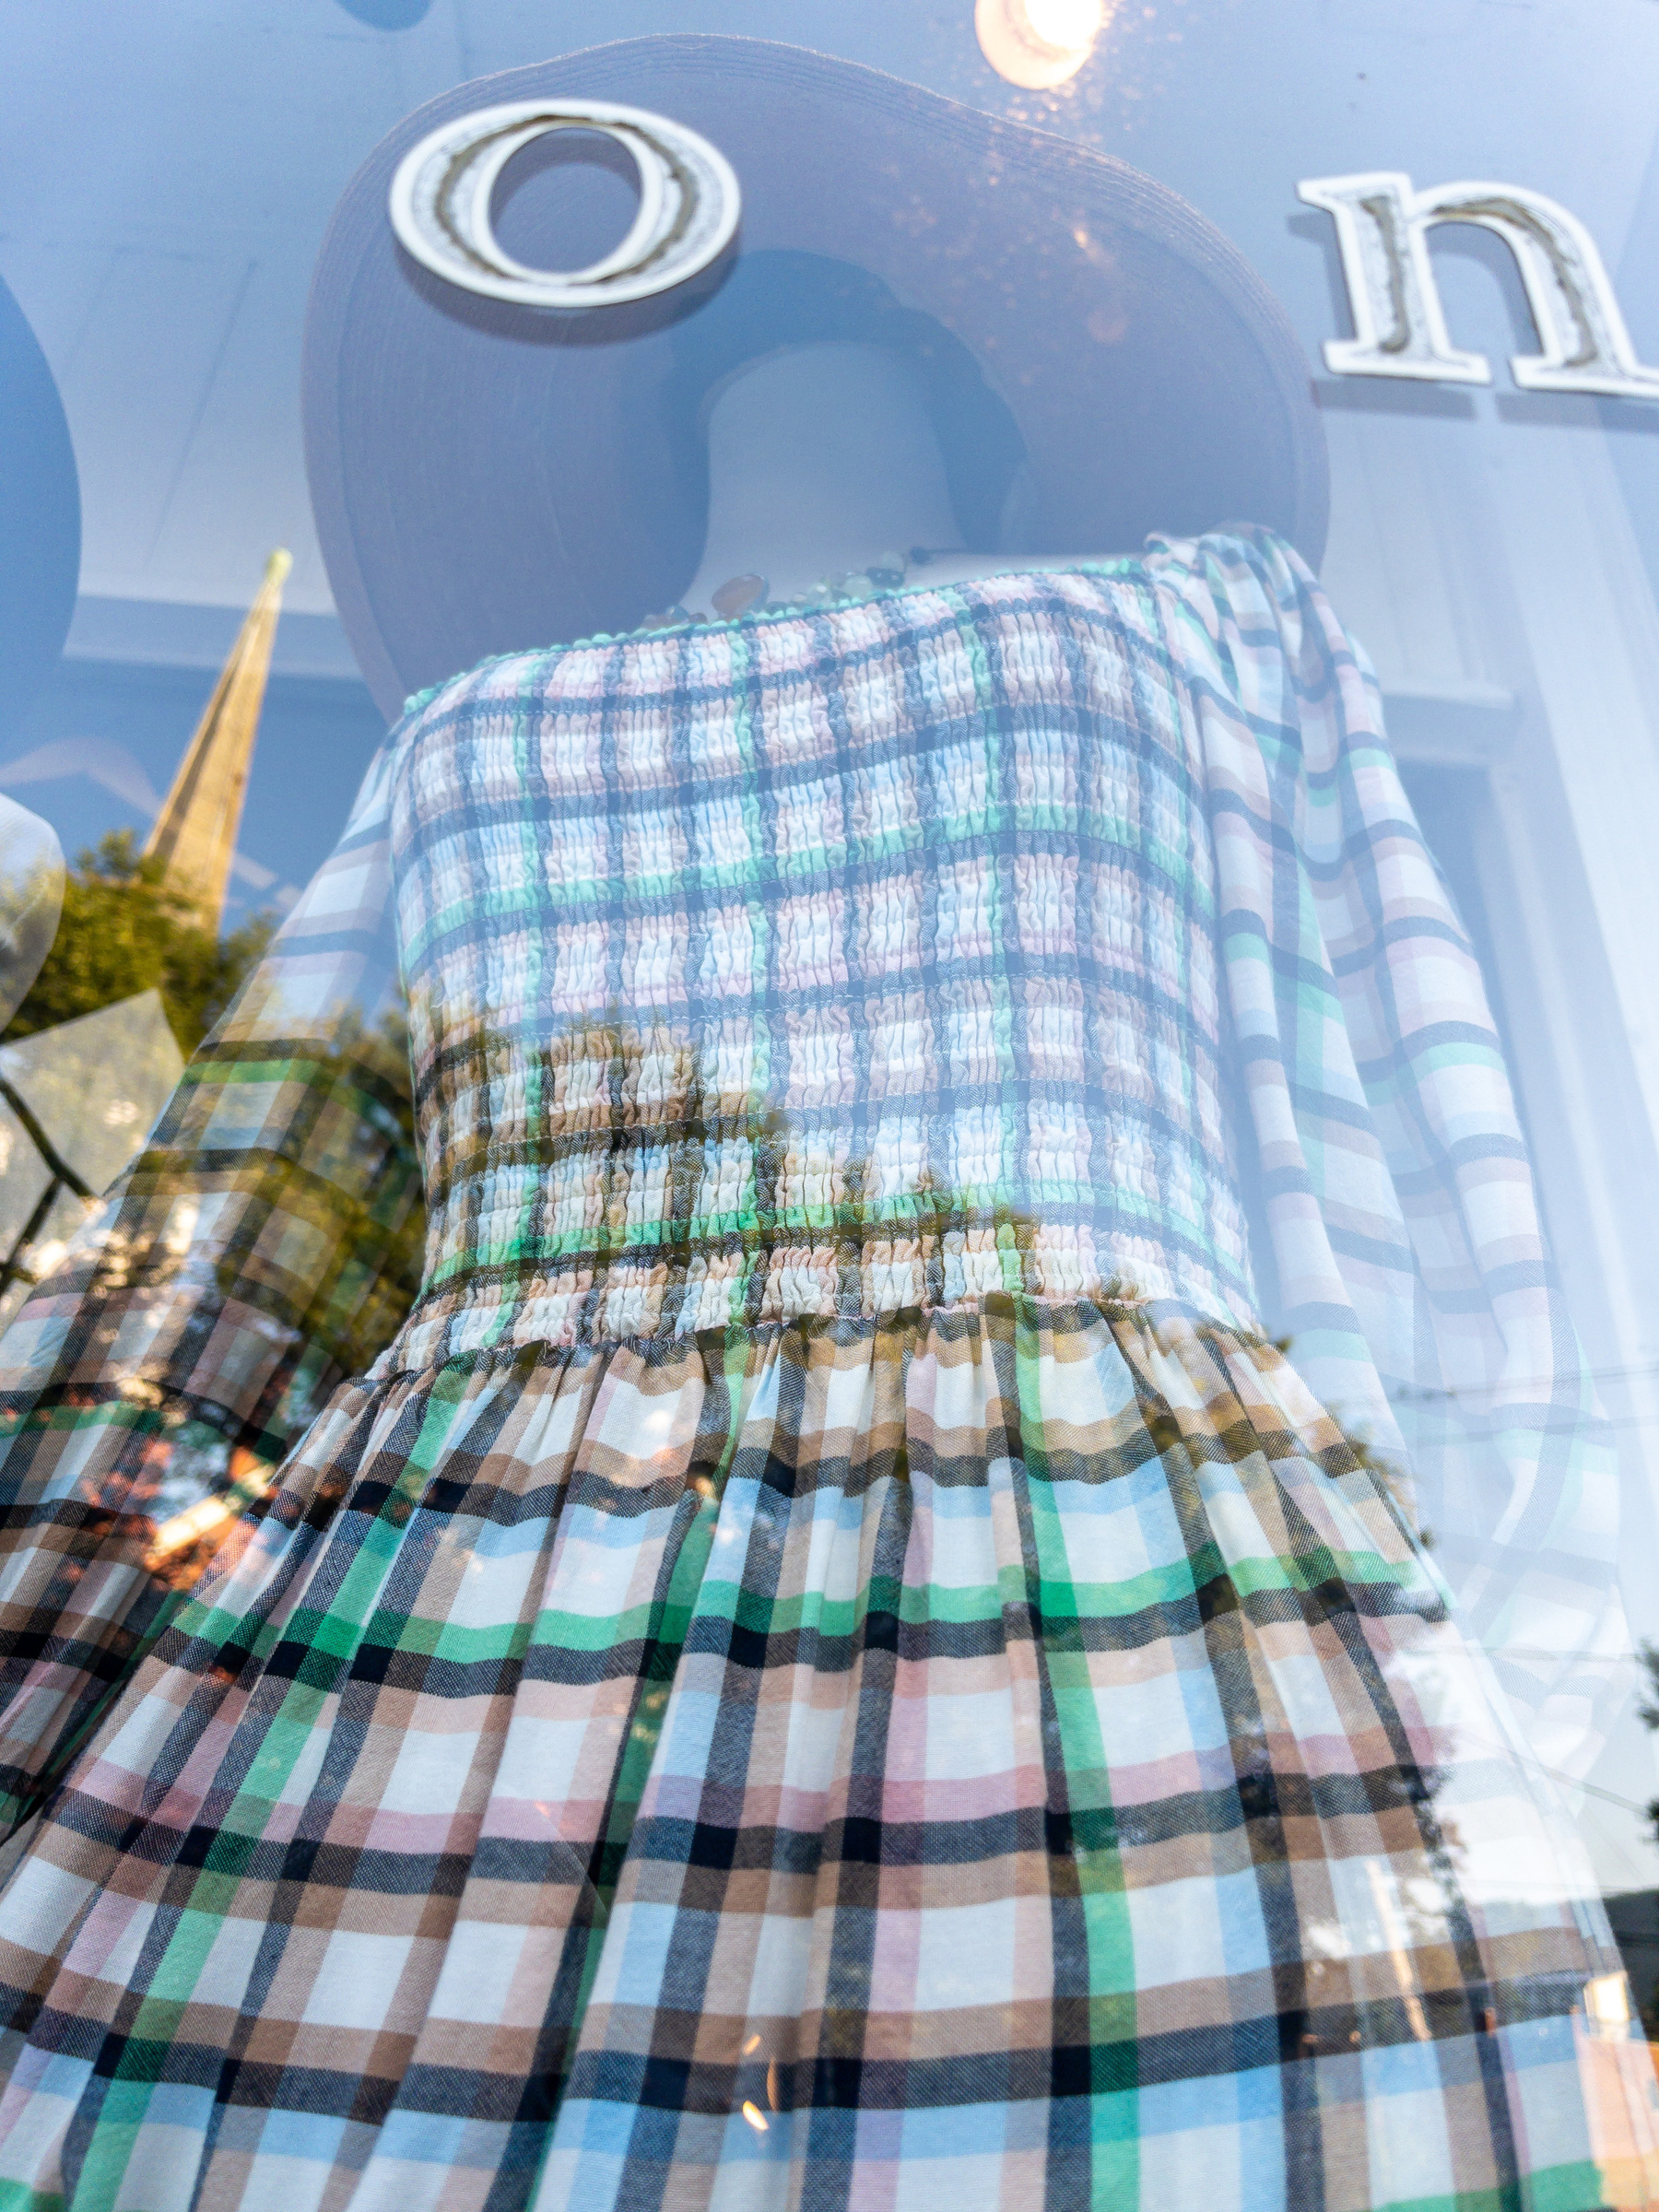 Brown, black and blue plaid dress on a mannequin in a shop window.